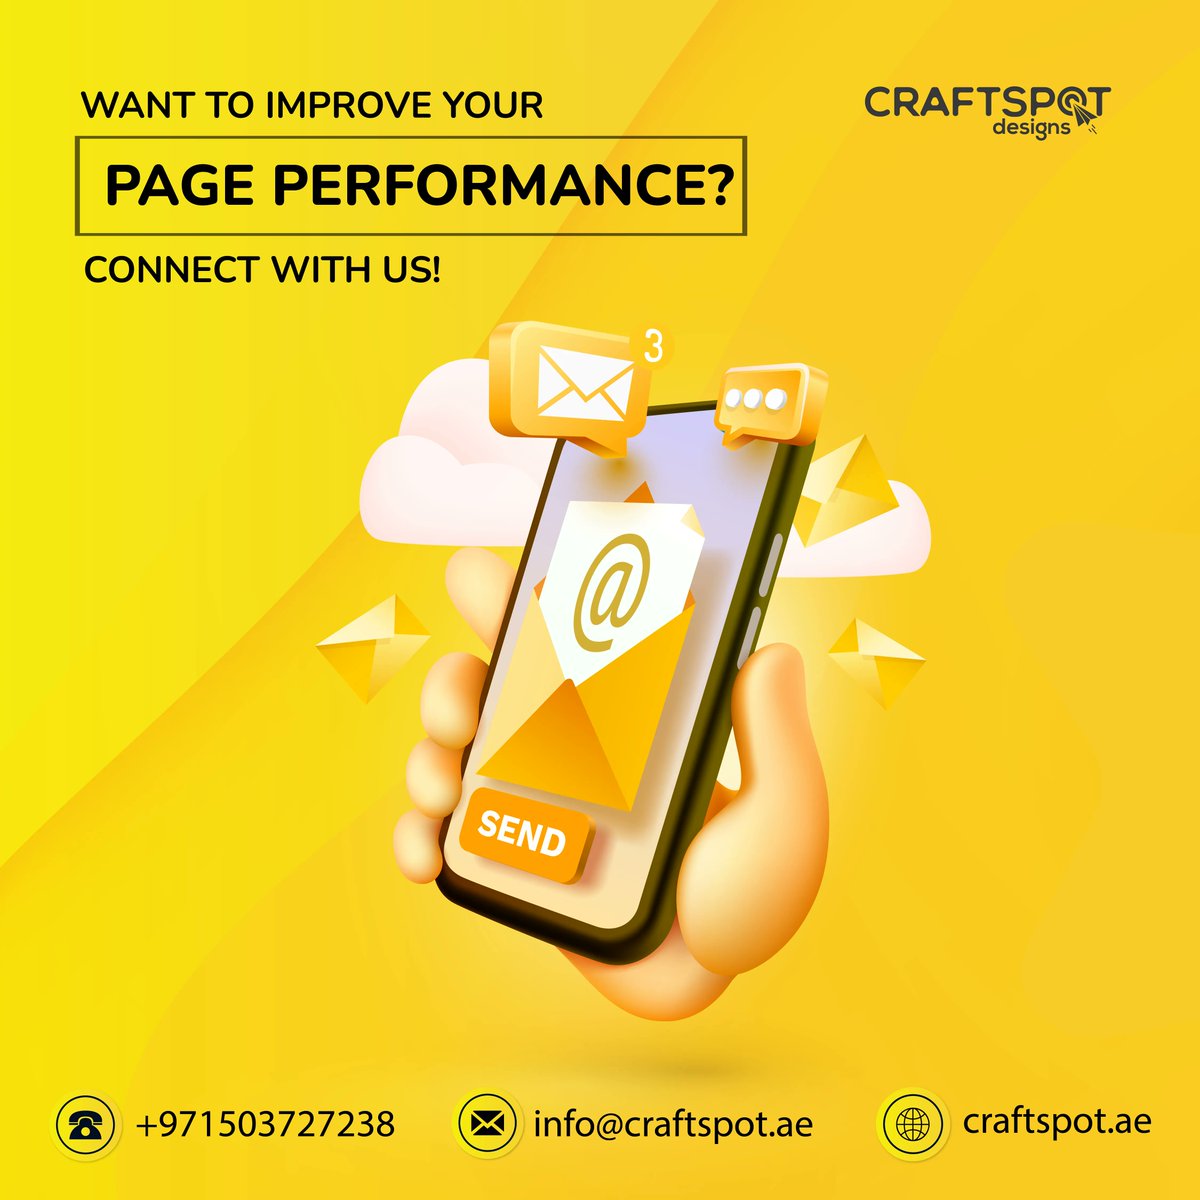 The Core Web Vitals report shows how your pages perform, based on real world usage data (sometimes called field data). 
Studies have shown the significant impact of better Core Web Vitals on user behavior and key metrics. #PagePerformanceMatters #WebOptimization #UserEngagement